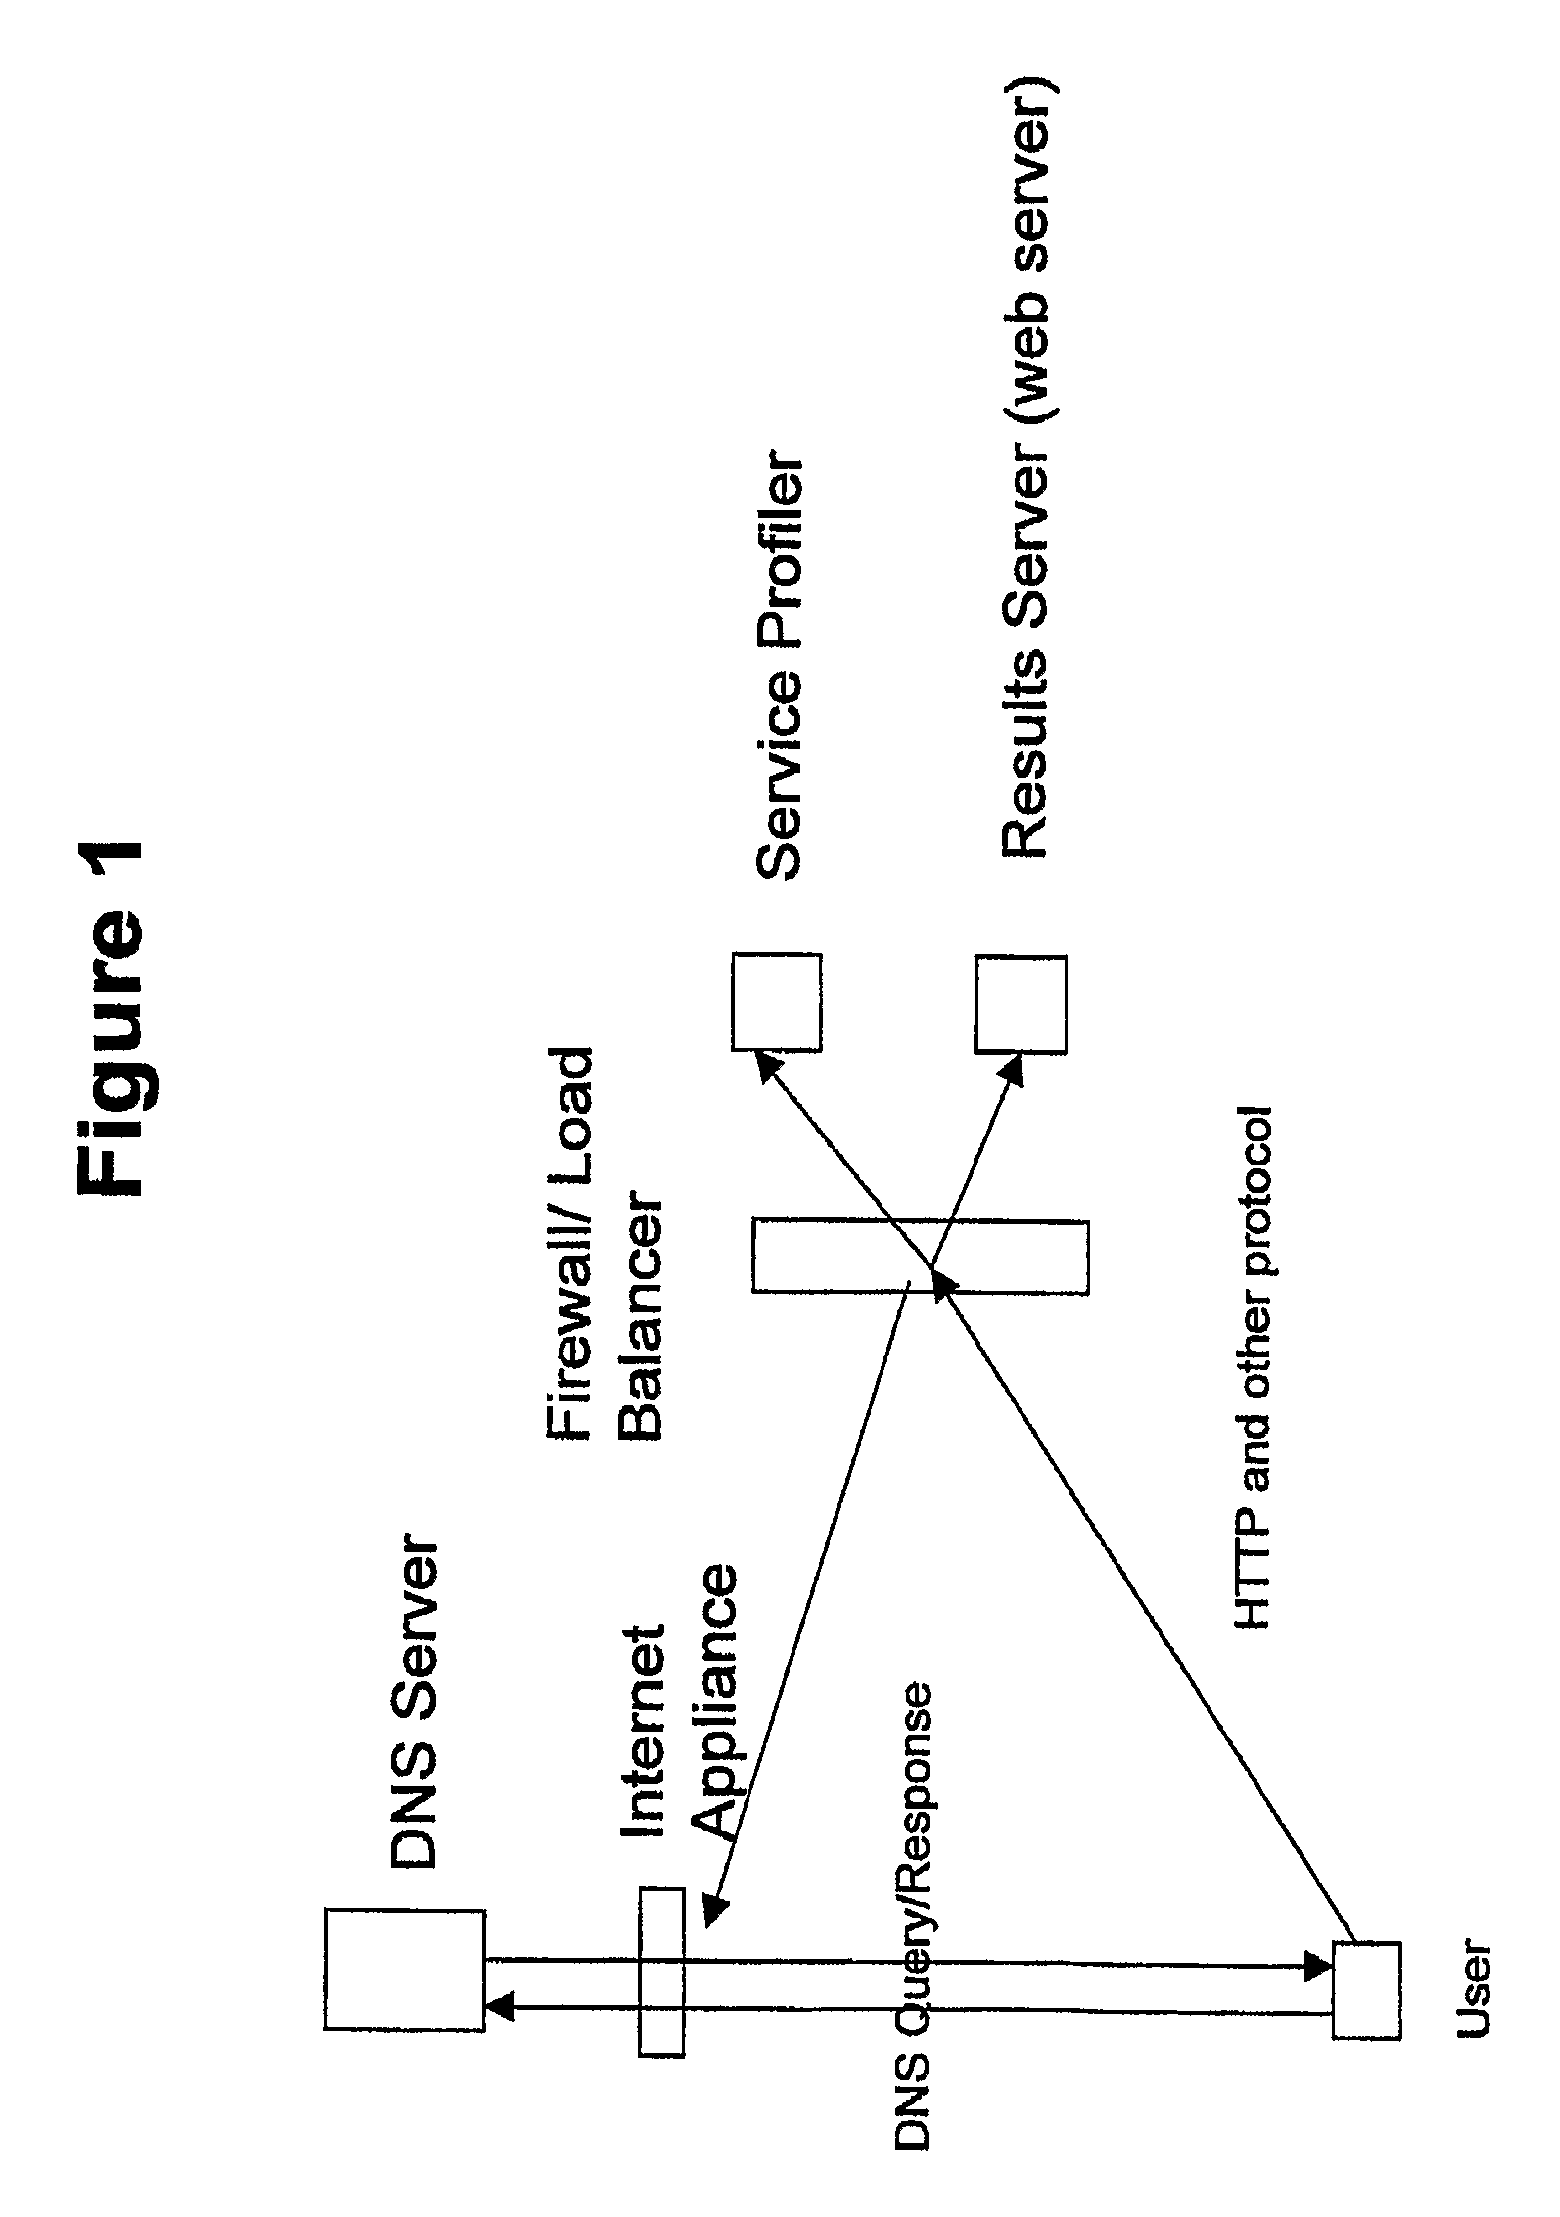 Systems and methods for discerning and controlling communication traffic